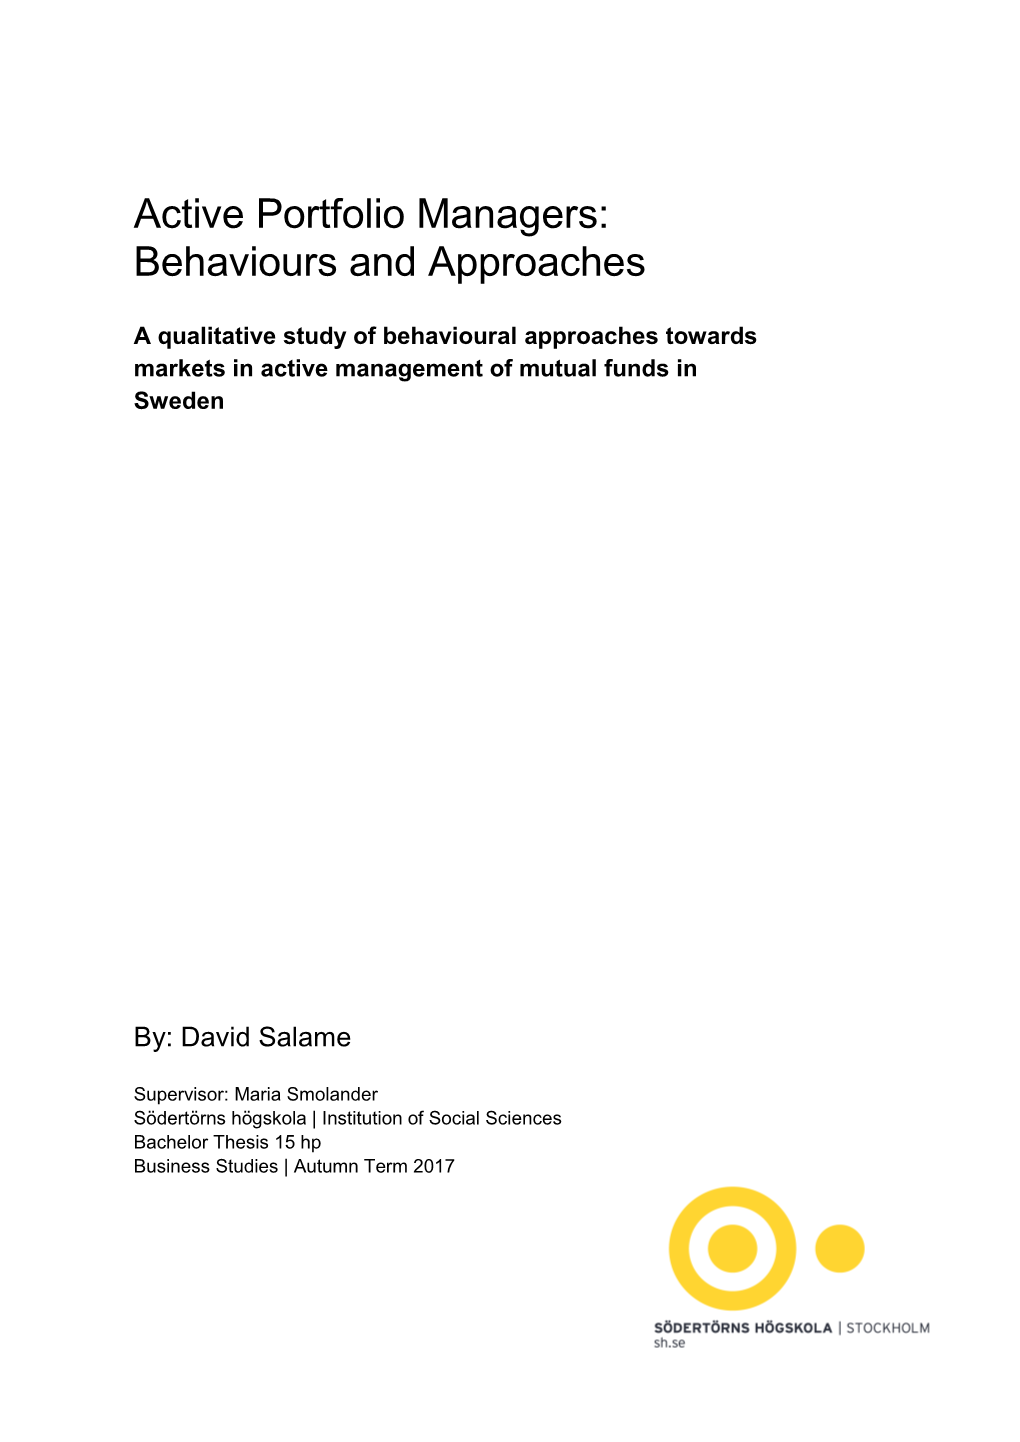 Behaviours and Approaches